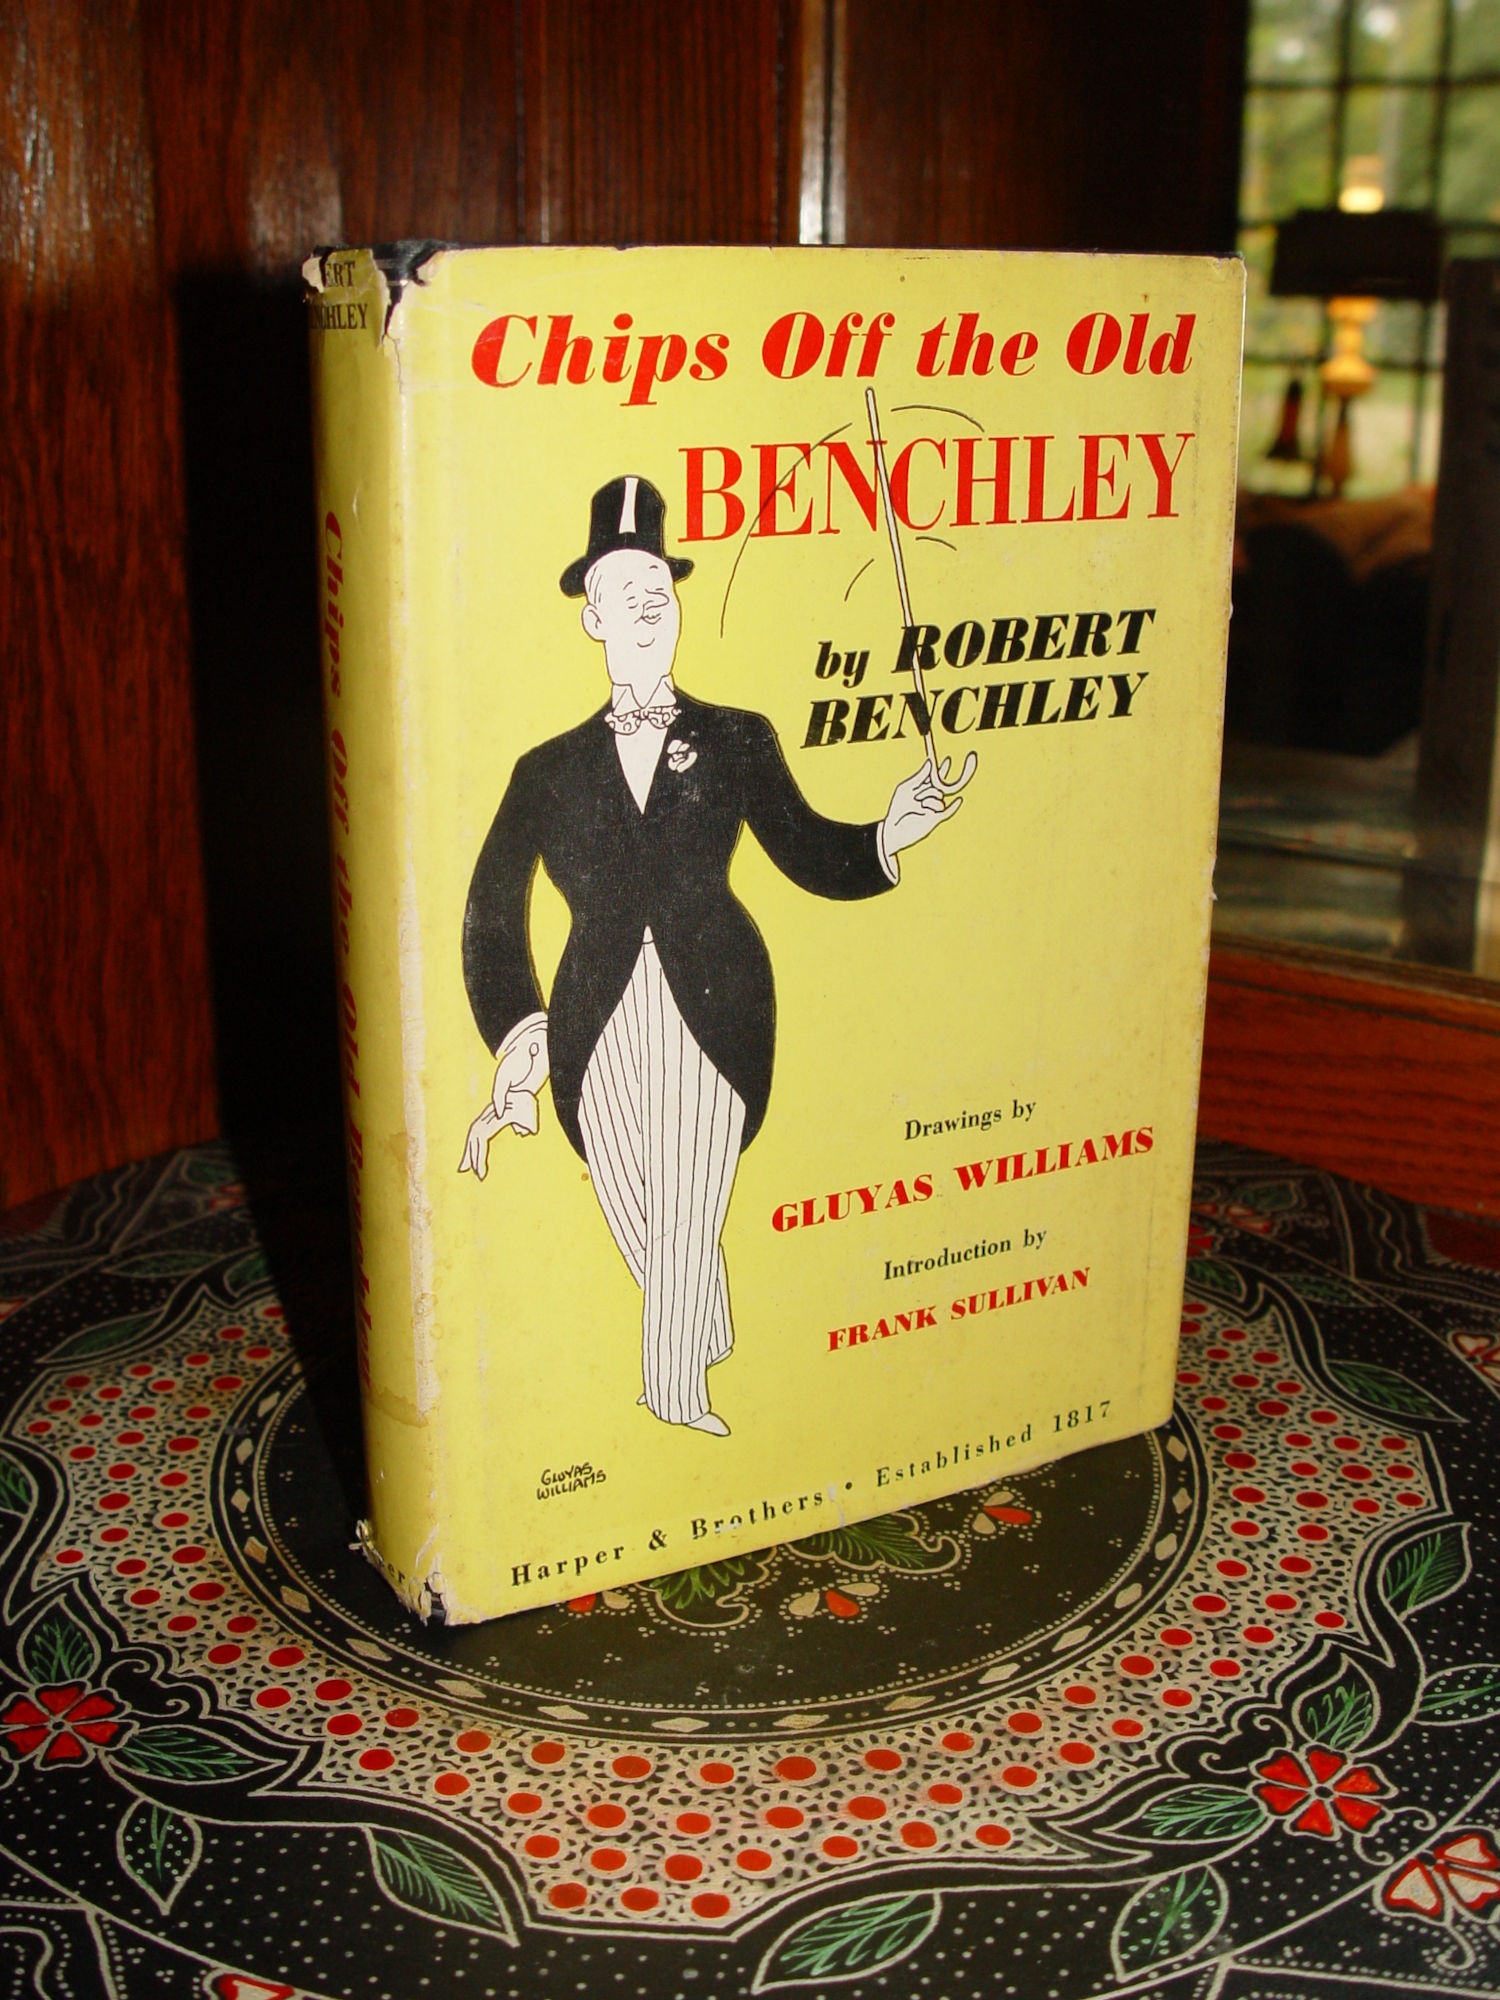 Chips Off the Old Benchley 1949 by Robert
                        Benchley